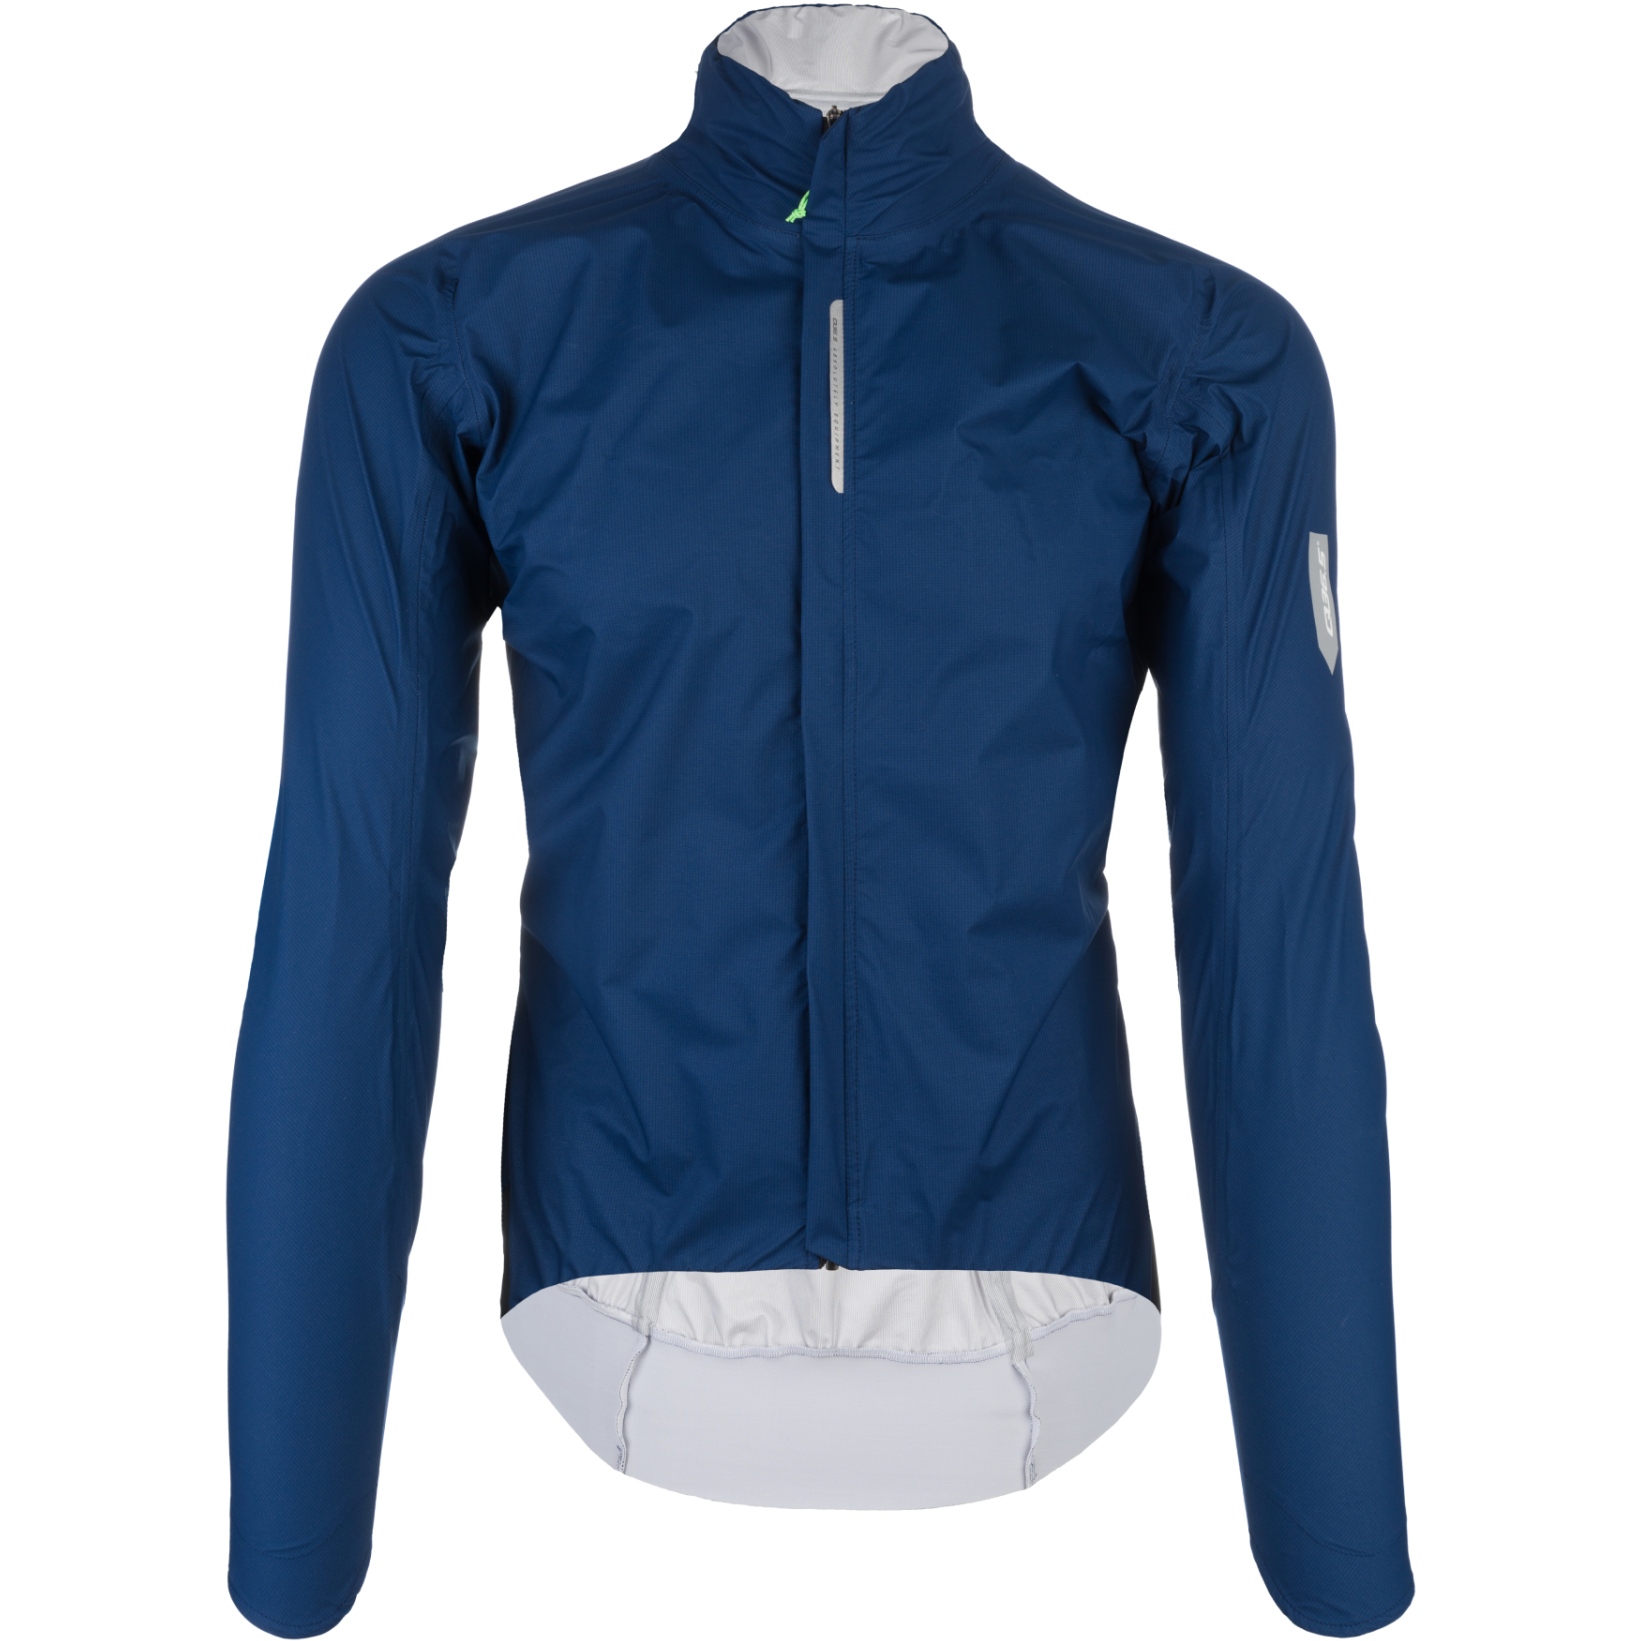 Picture of Q36.5 R. Shell Protection X Cycling Rain Jacket - navy